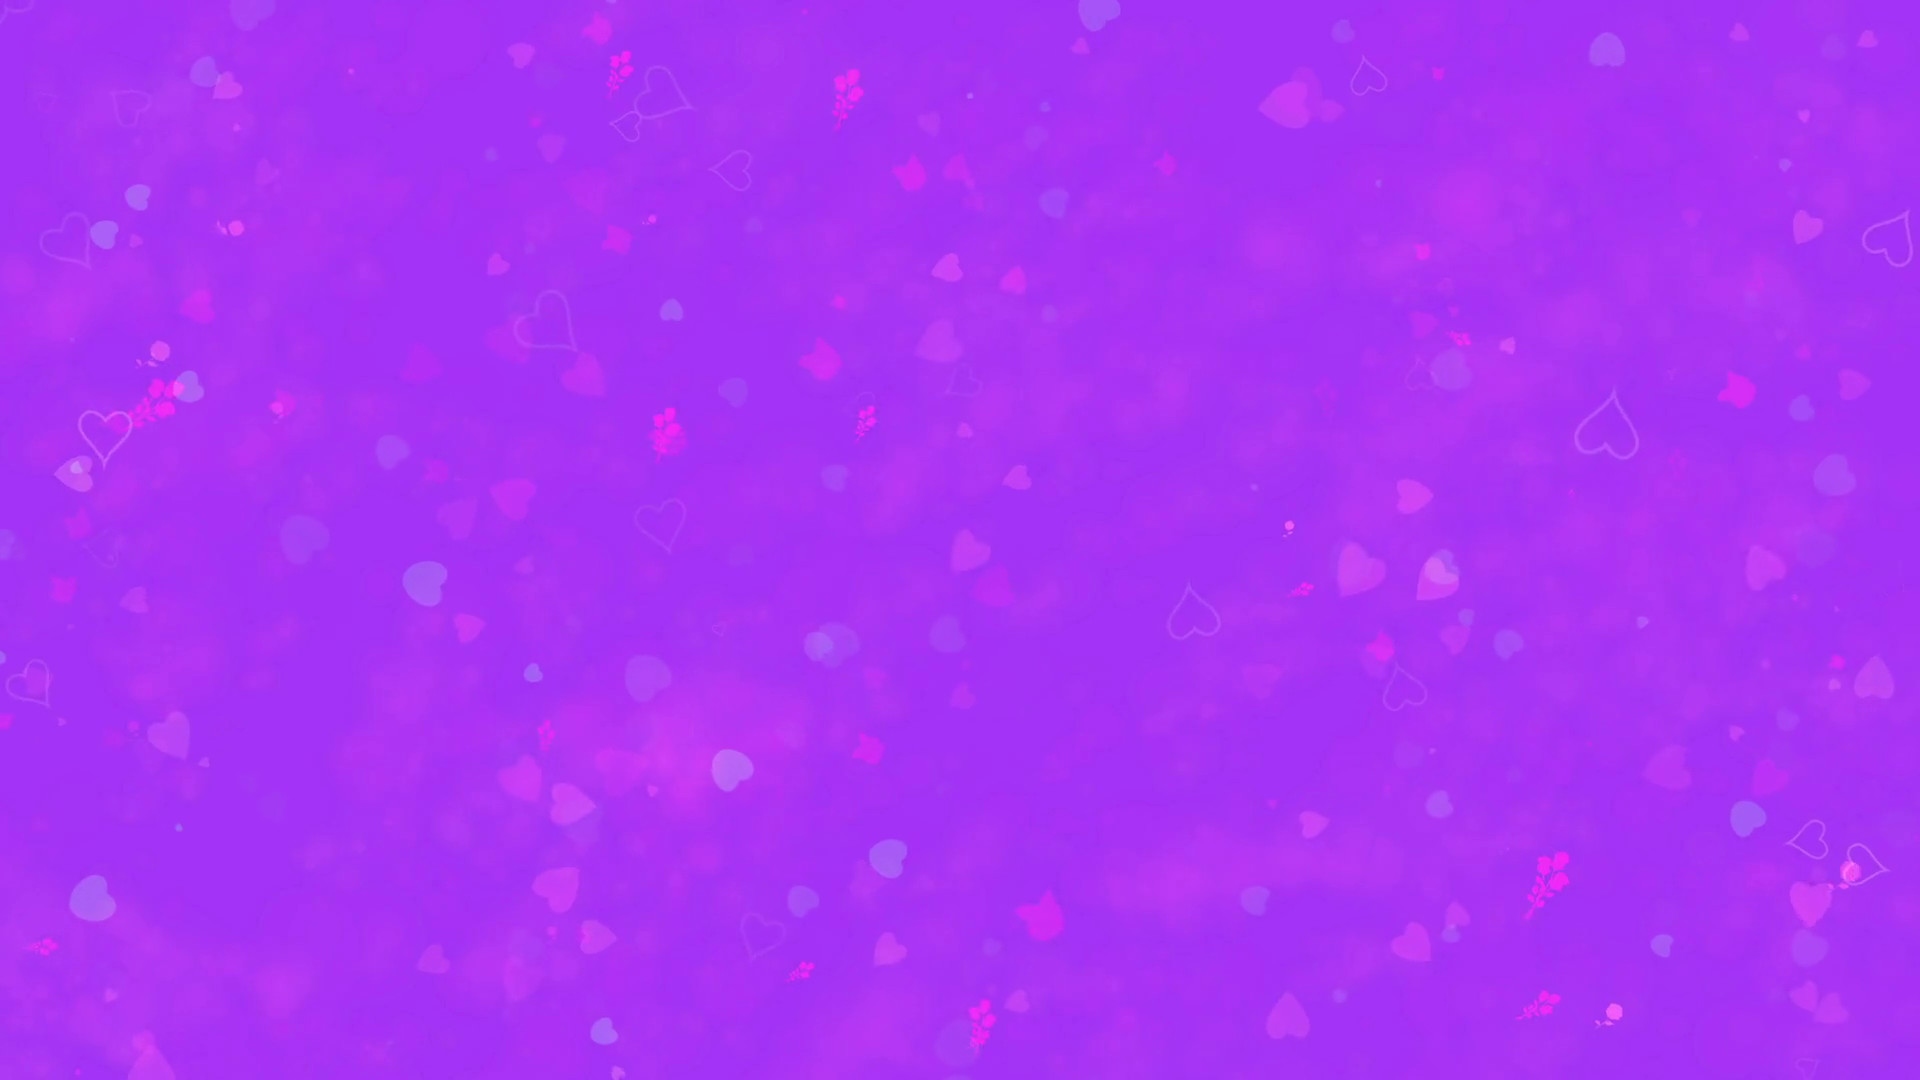 1920x1080 "I Love You" text in Portuguese and Spanish "Te Amo" formed from dust and  turns to dust horizontally on purple background Motion Background -  VideoBlocks